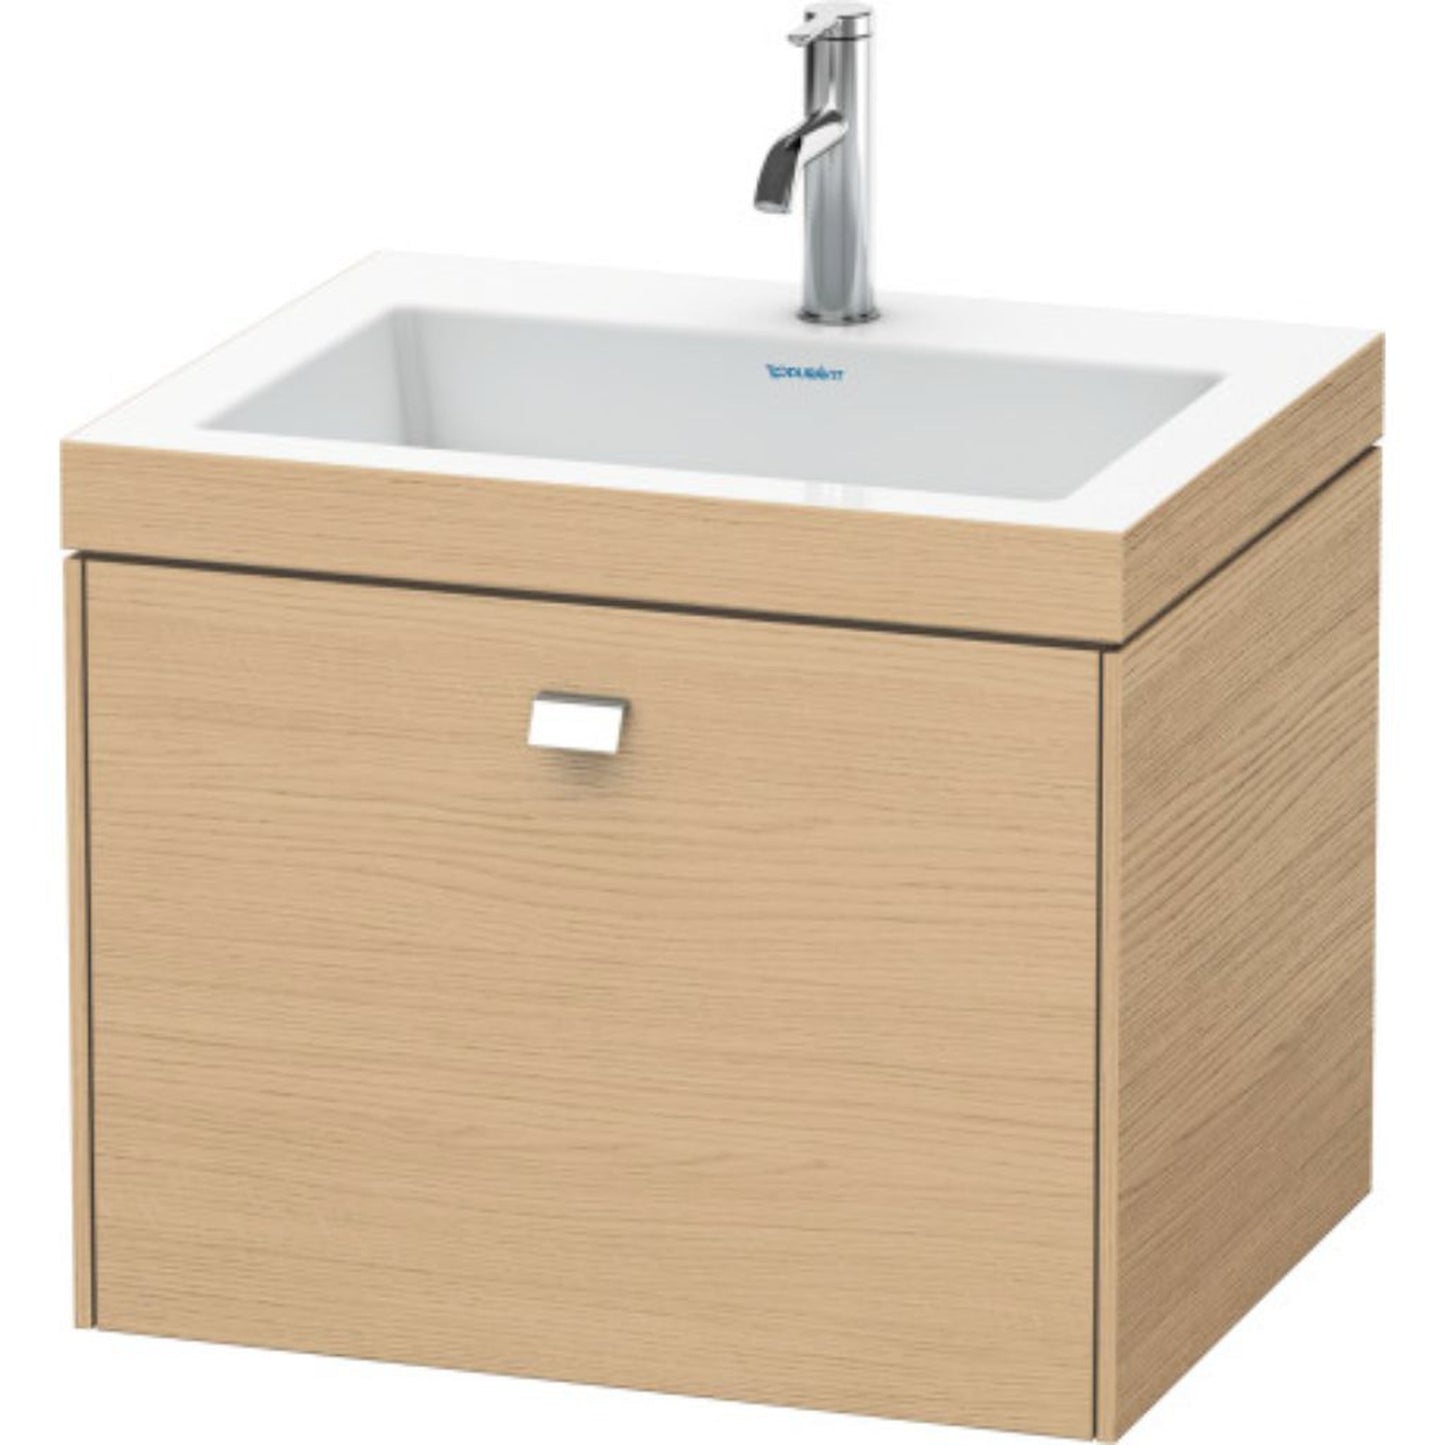 Duravit Brioso 24" x 20" x 19" One Drawer C-Bonded Wall-Mount Vanity Kit With One Tap Hole in Natural Oak and Chrome Handle